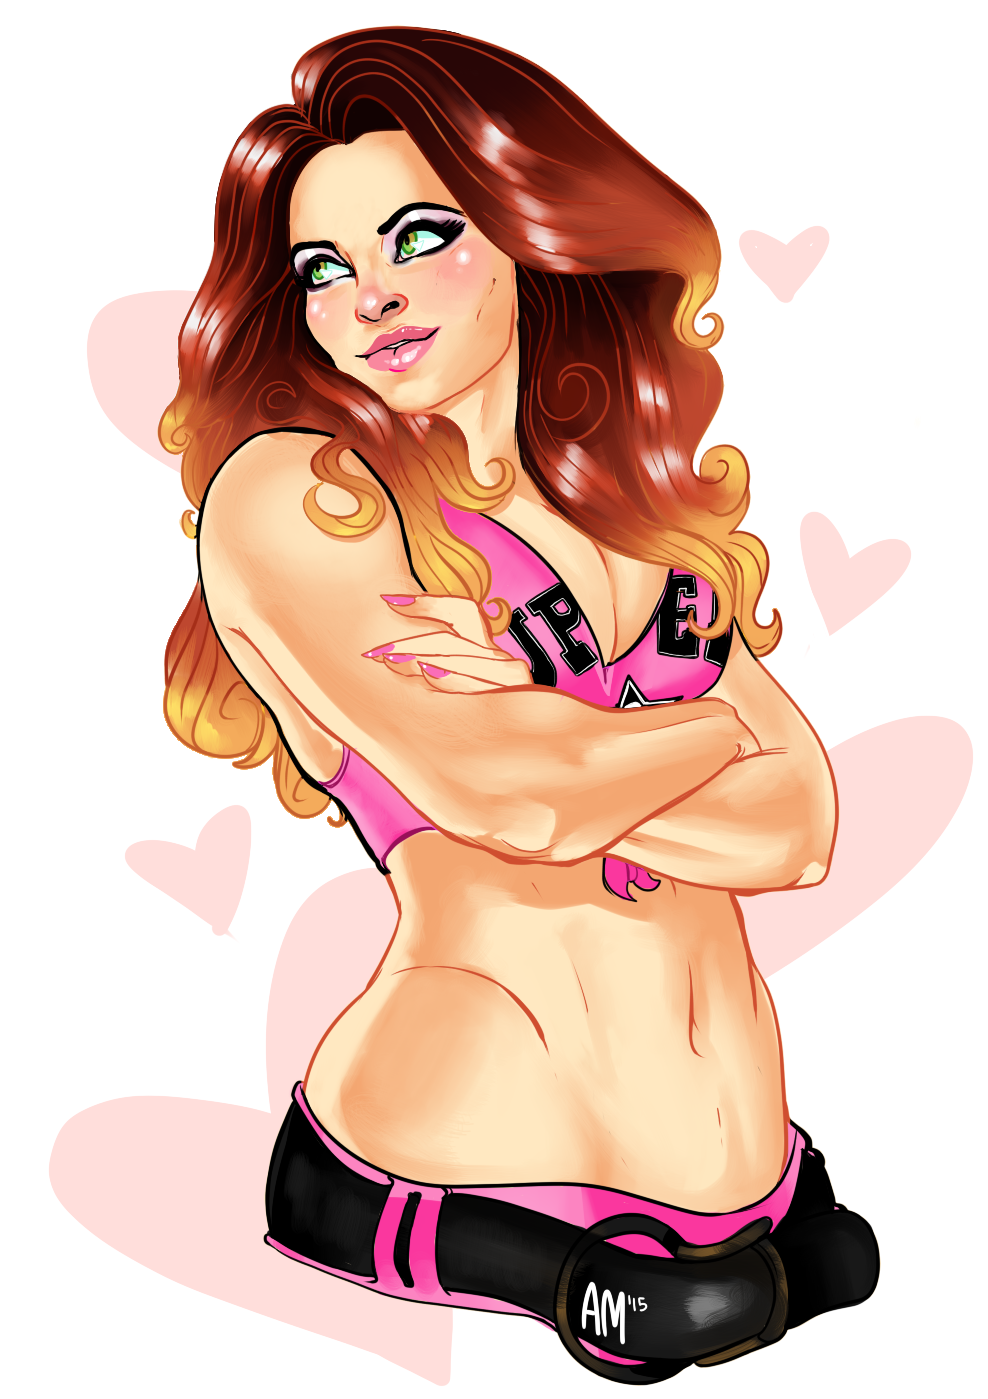 redneckkungfu:  i drew maria kanellis cuz shes pretty and the hearts signify my crush